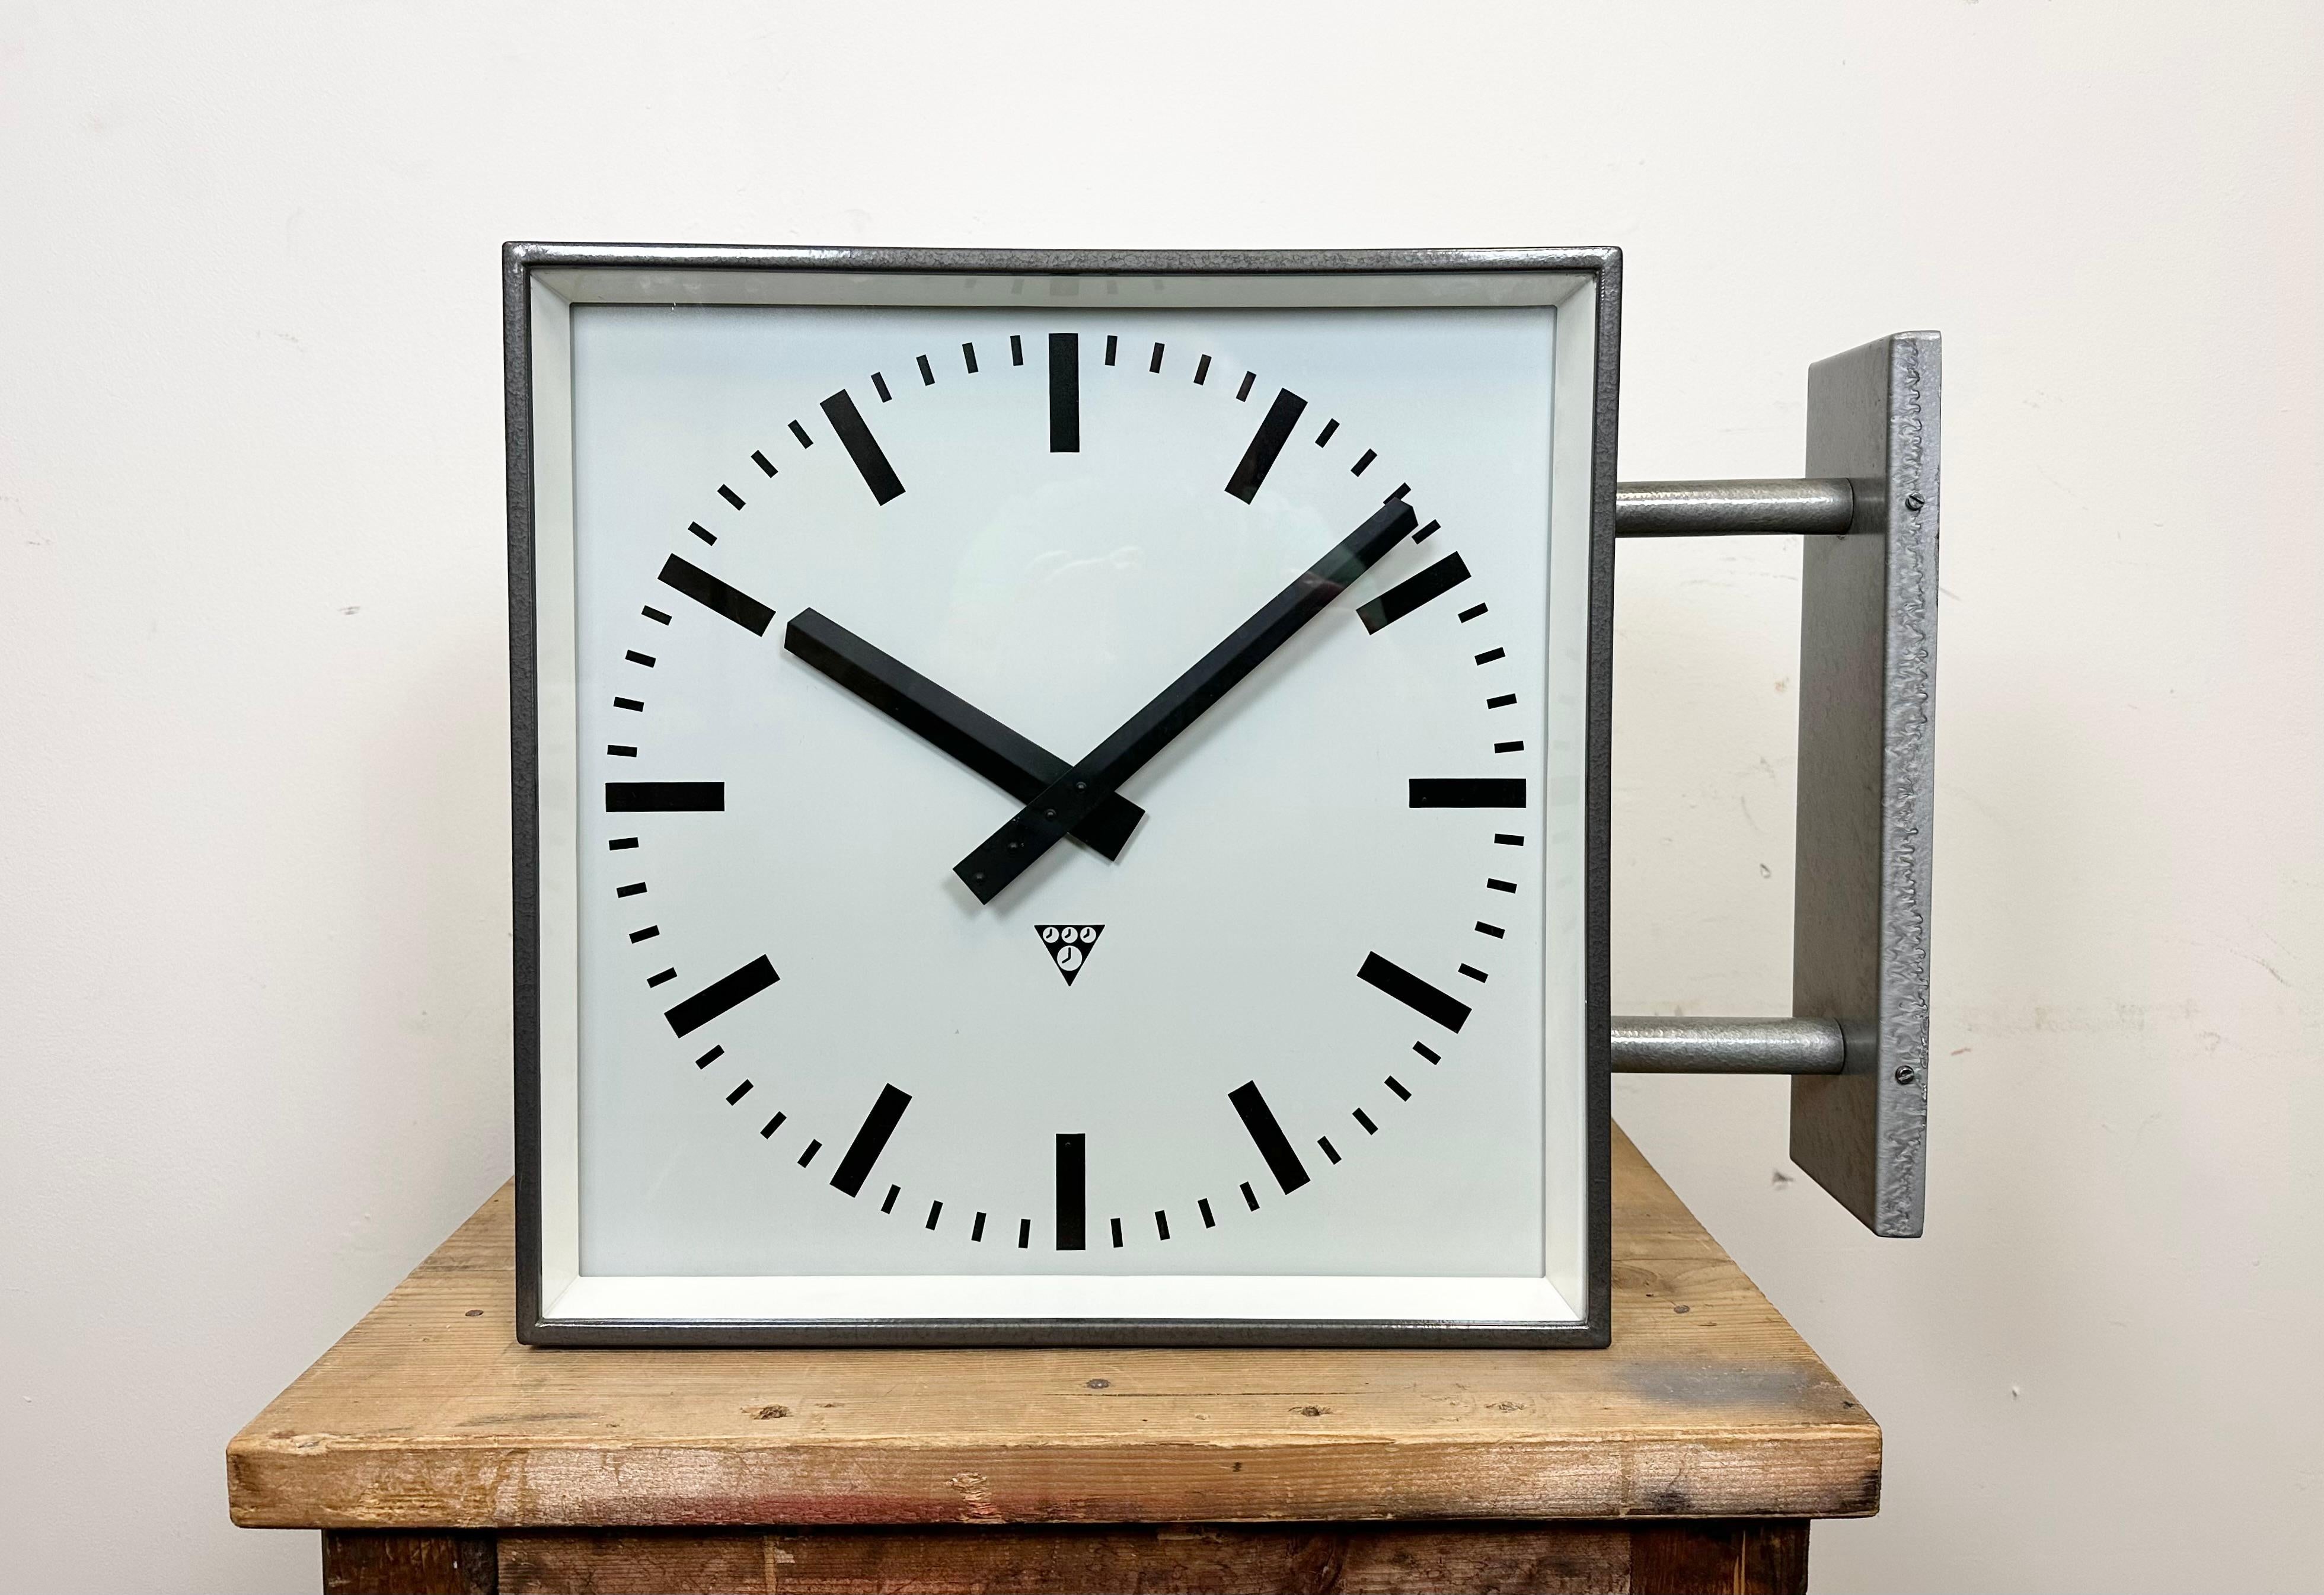 This square double sided railway, school or factory wall clock was produced by Pragotron, in former Czechoslovakia, during the 1970s. The piece features a grey metal body, a dark grey hammer paint clock frames, a clear glass covers, and an aluminum